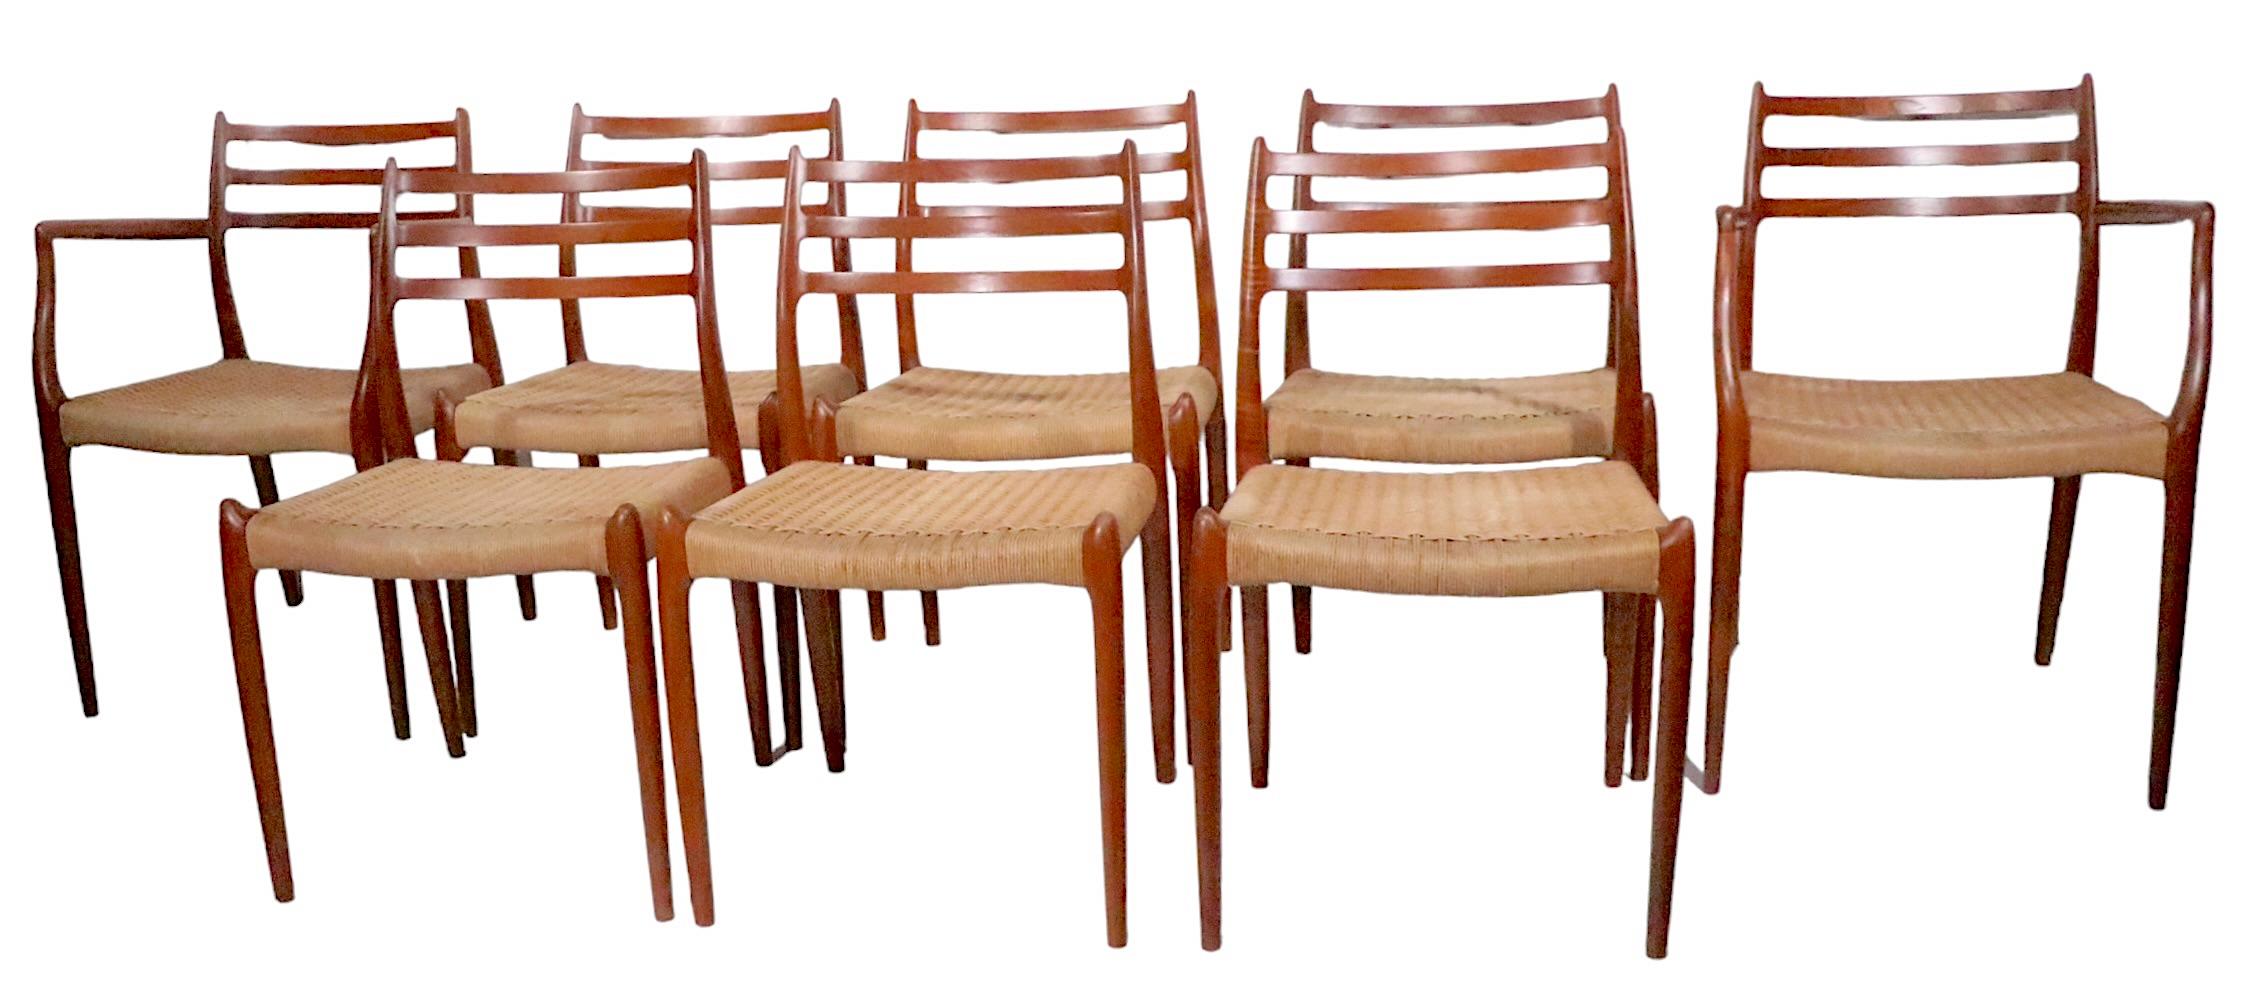 Danish Set of Eight Teak Dining Chairs by Neils Moller / J.L.Moller, circa 1960s In Good Condition For Sale In New York, NY